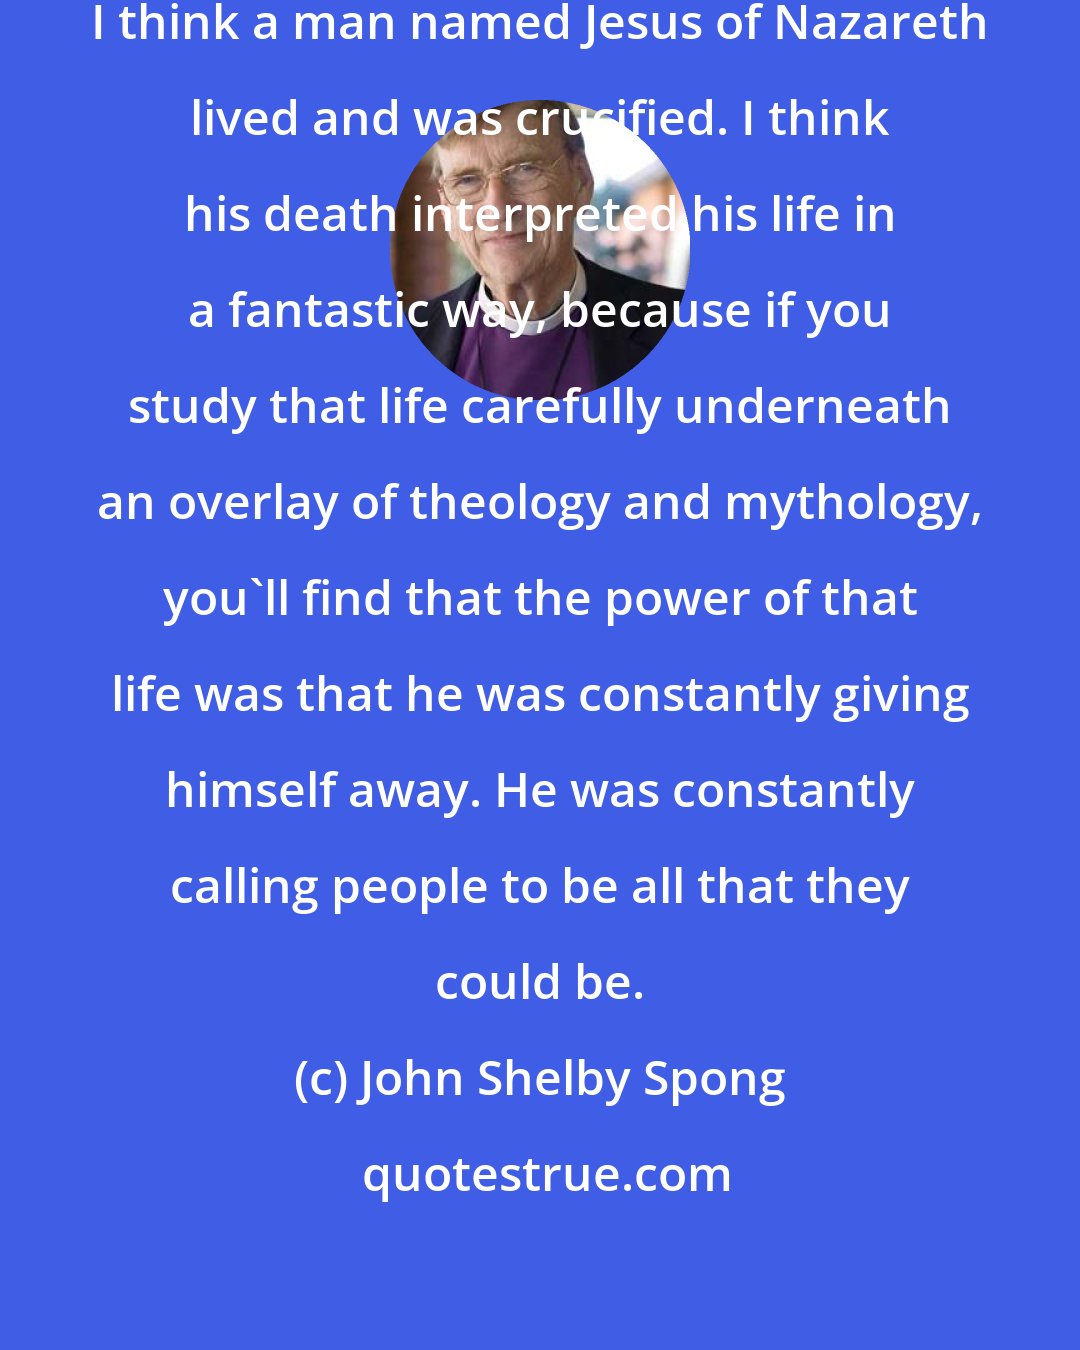 John Shelby Spong: I think Jesus is a fact of history. I think a man named Jesus of Nazareth lived and was crucified. I think his death interpreted his life in a fantastic way, because if you study that life carefully underneath an overlay of theology and mythology, you'll find that the power of that life was that he was constantly giving himself away. He was constantly calling people to be all that they could be.